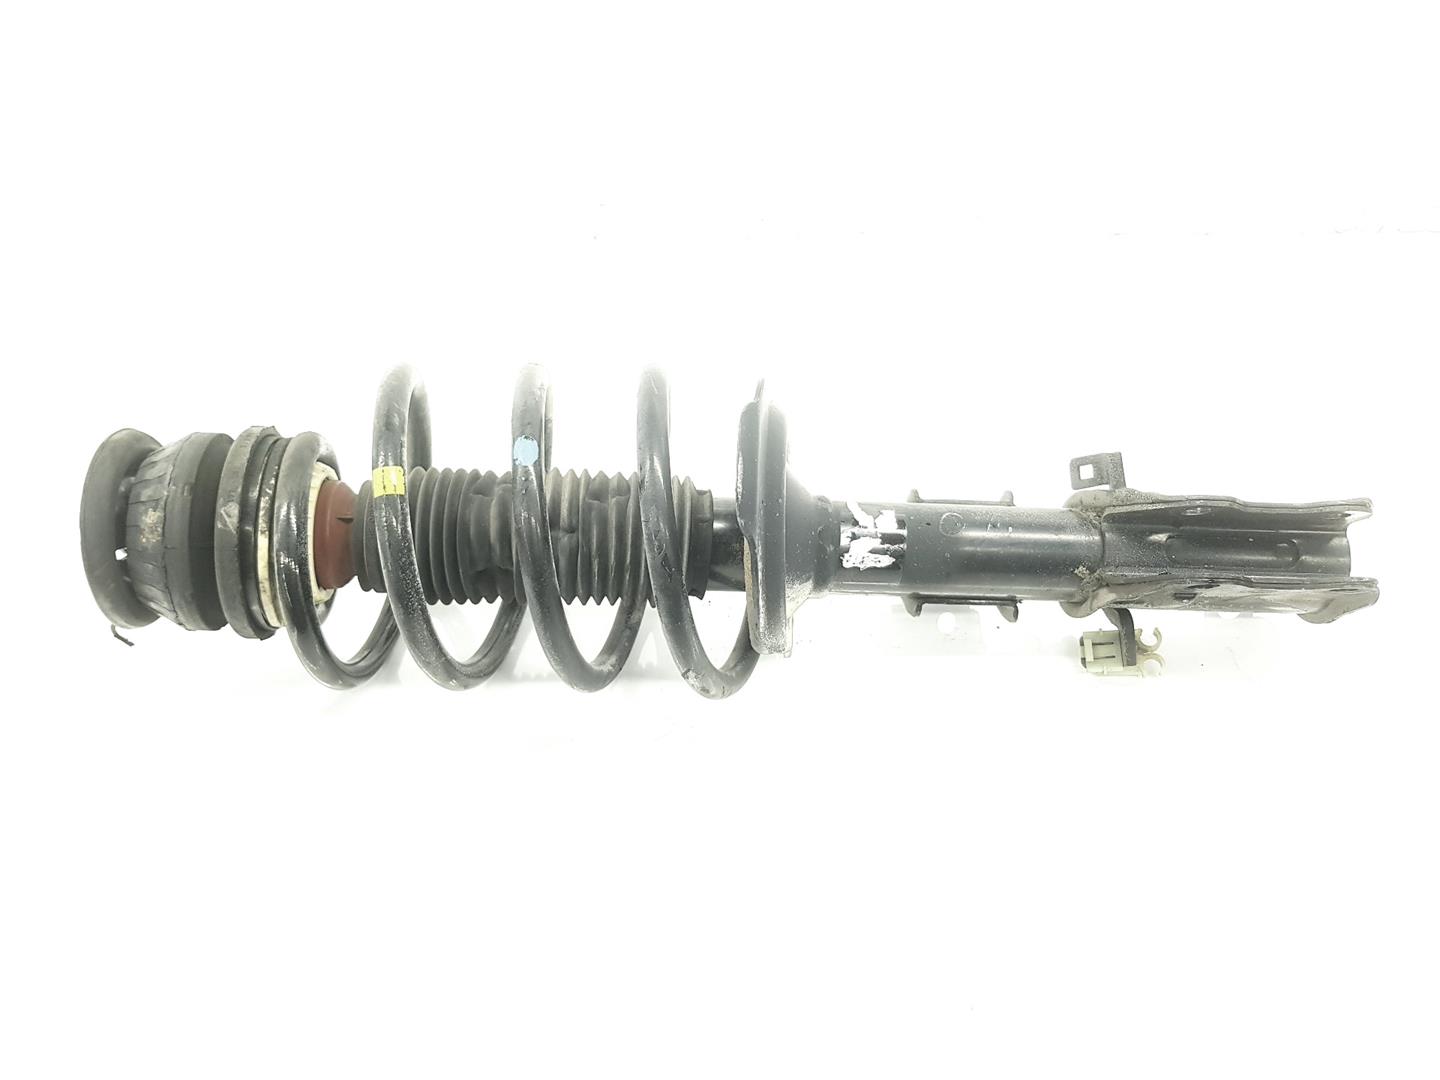 MERCEDES-BENZ Vito W639 (2003-2015) Front Right Shock Absorber A6393203613, A6393203613 19905700